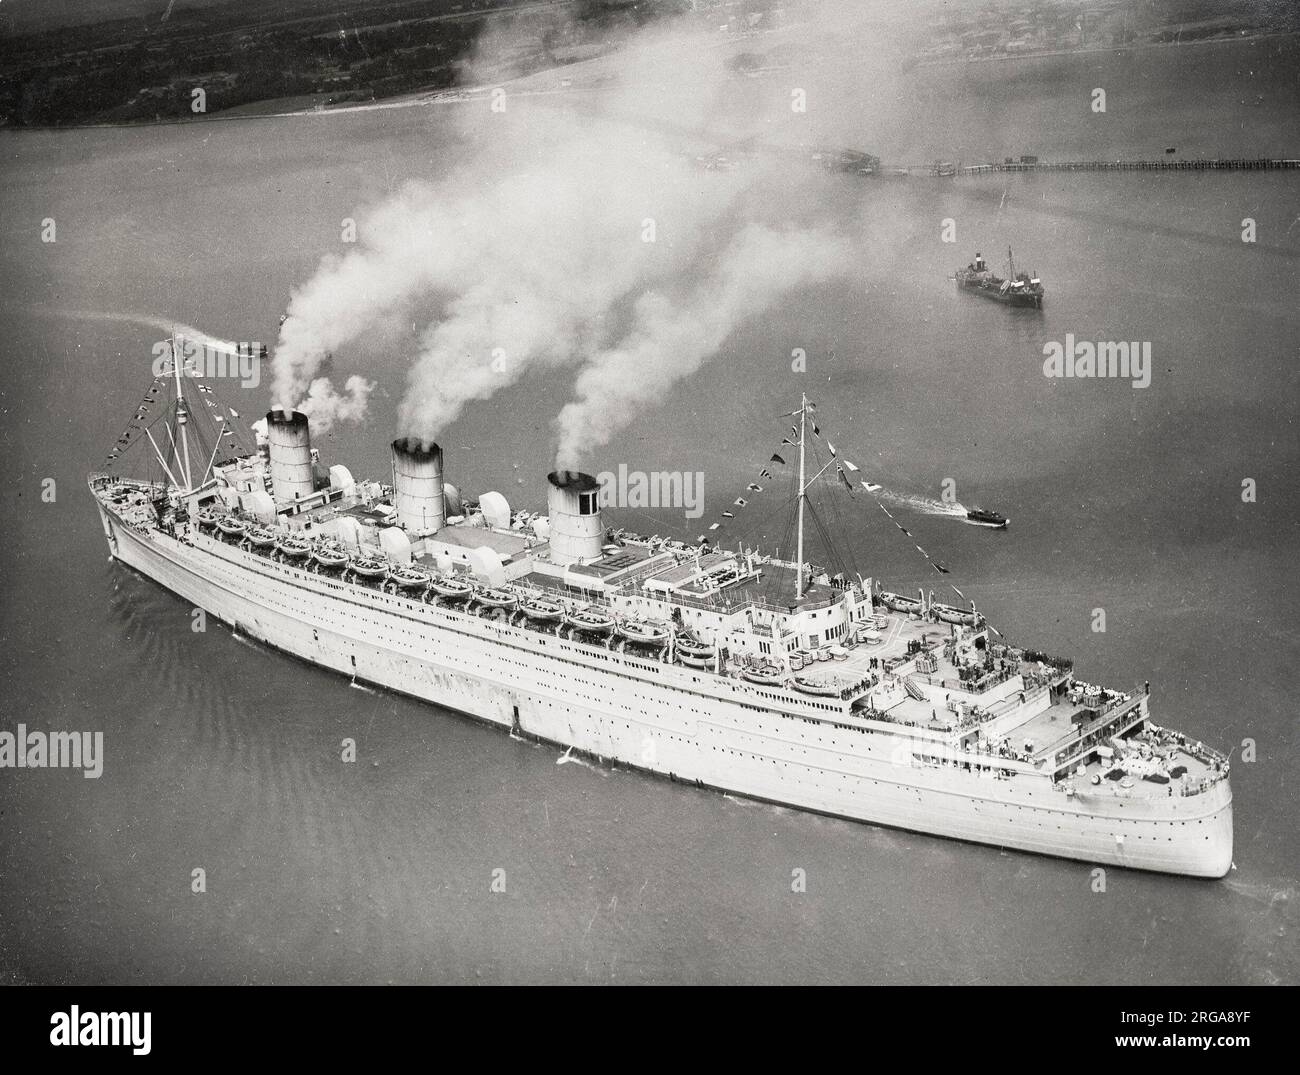 World War II vintage photograph - Ocean liner Queen Mary returns to Southampton at the end of the war having beeen used as a troop ship. Stock Photo